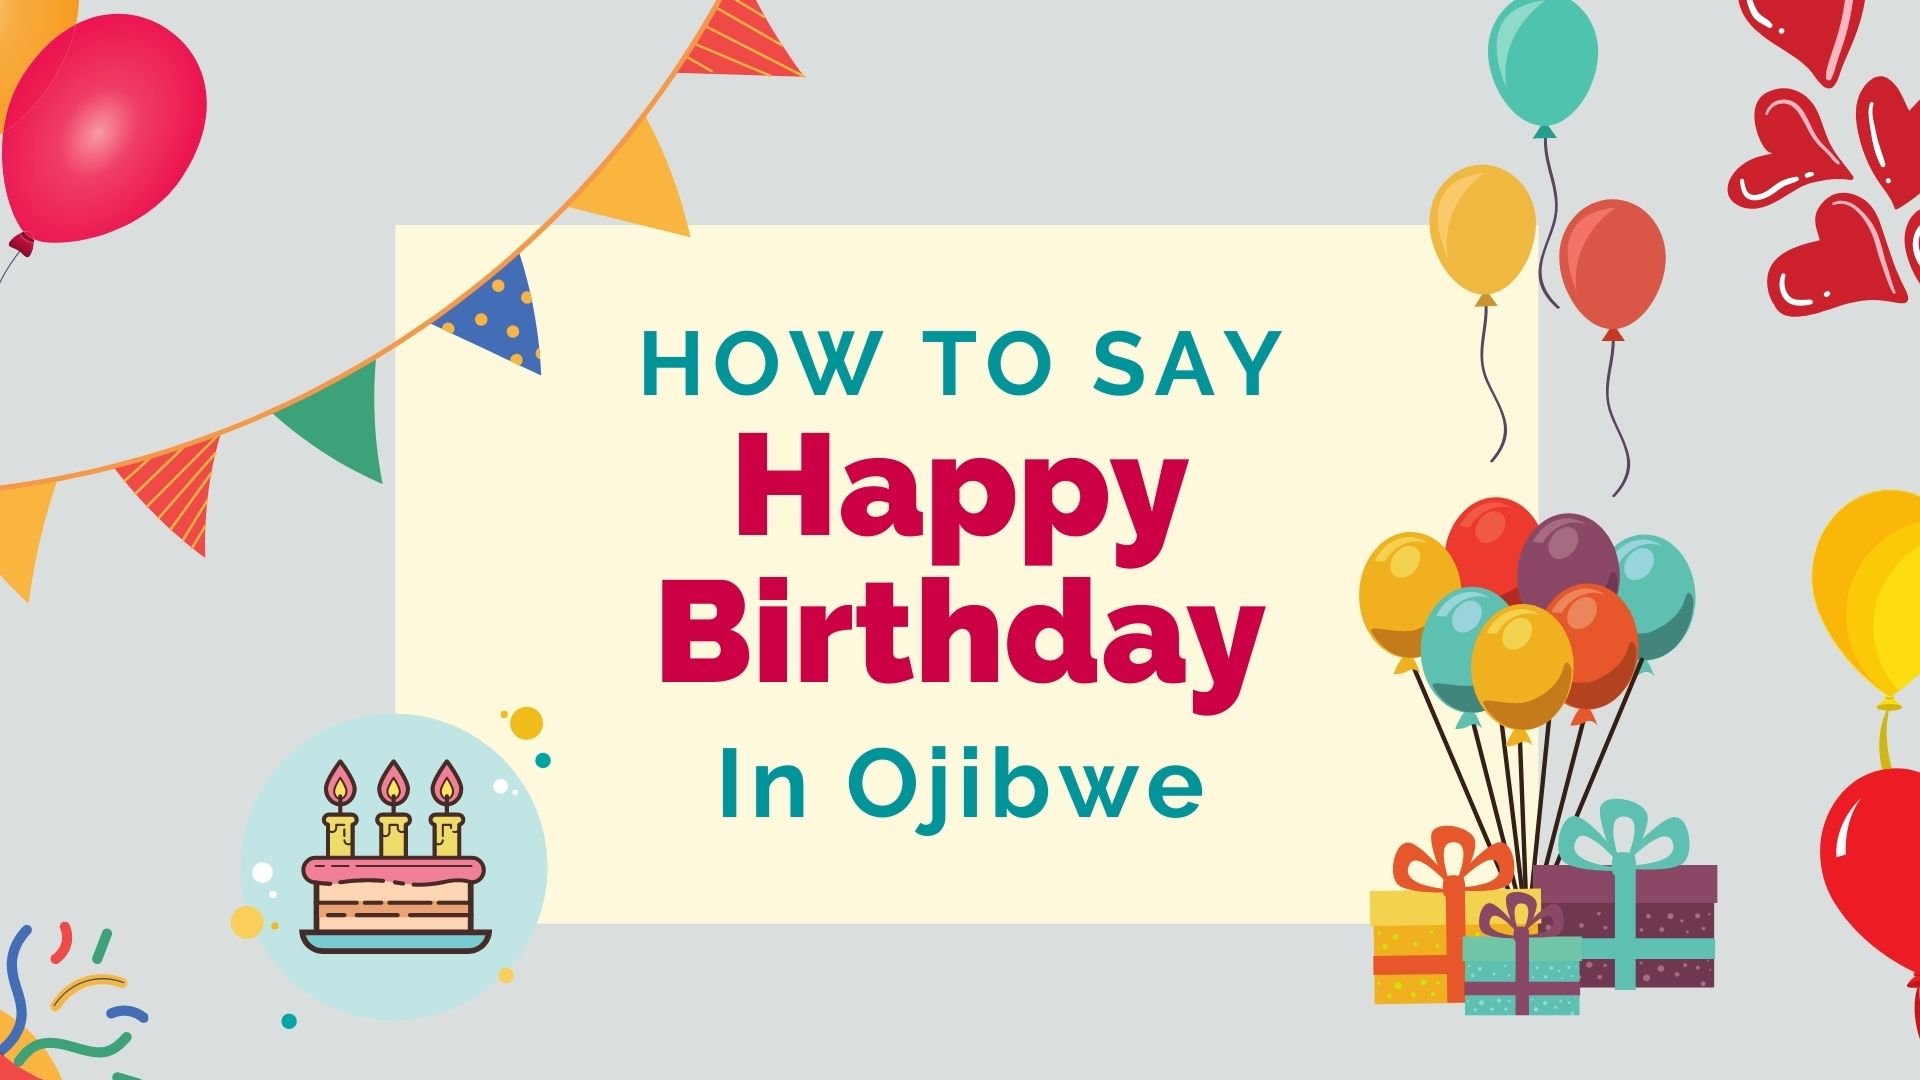 How To Say 'Happy Birthday' In Ojibwe - Lingalot